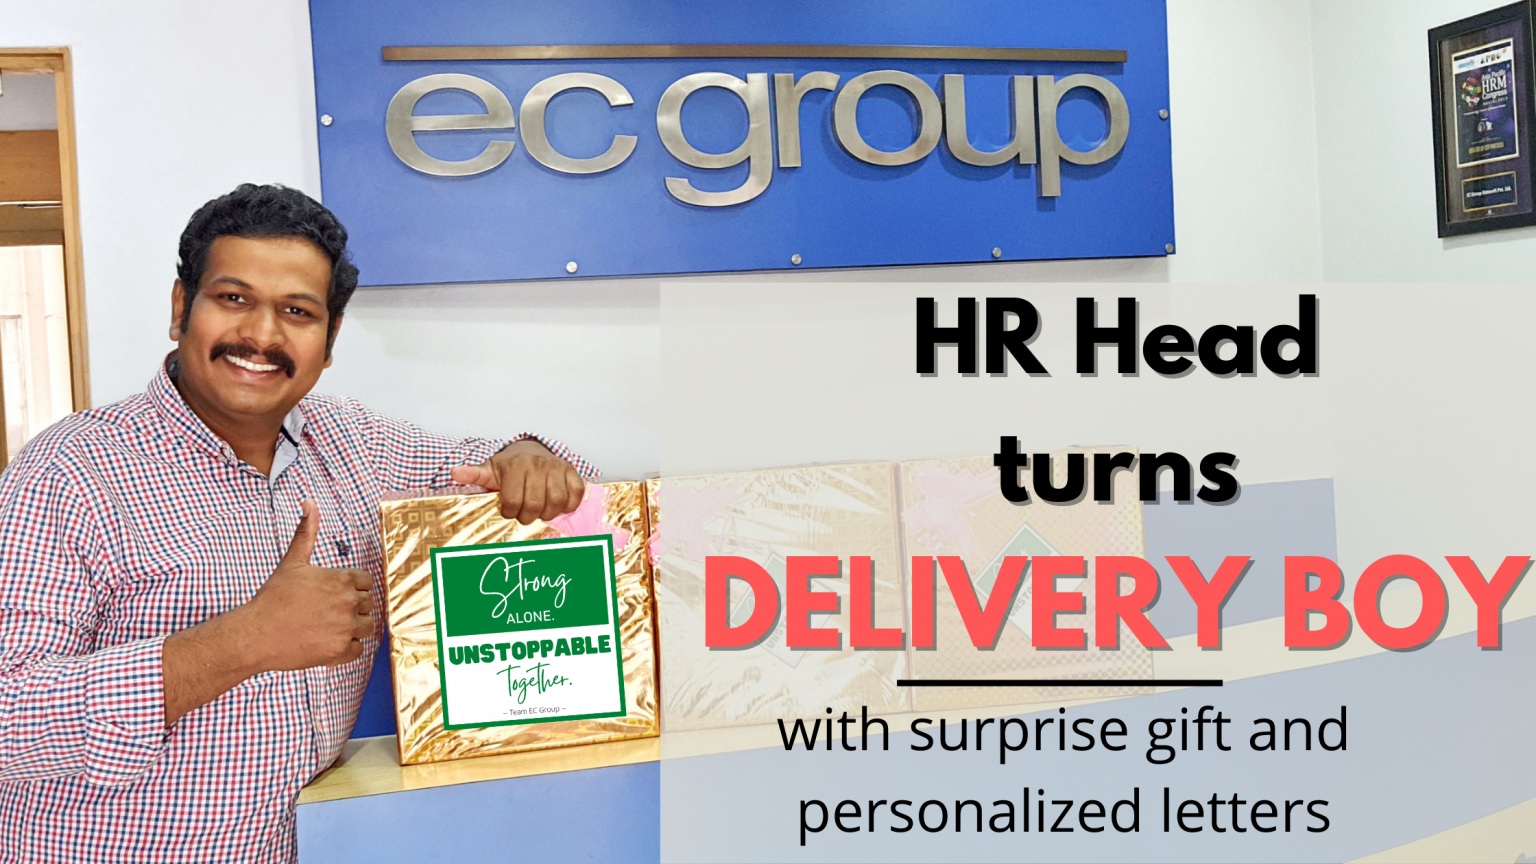 HR Head turns “Delivery Boy”